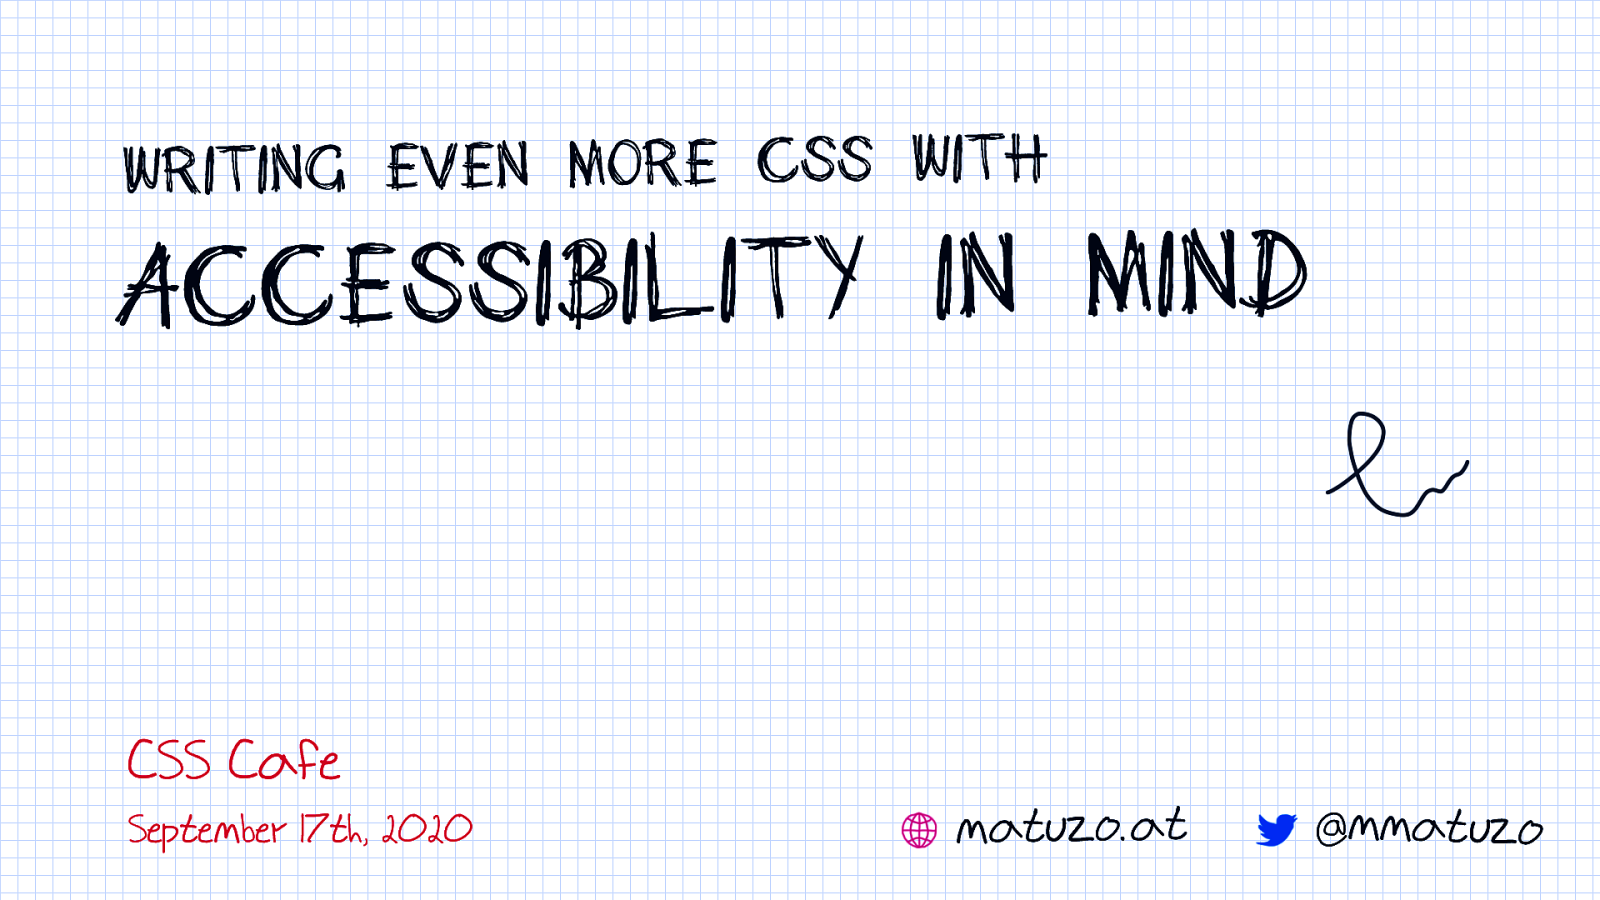 Writing even more CSS with Accessibility in mind